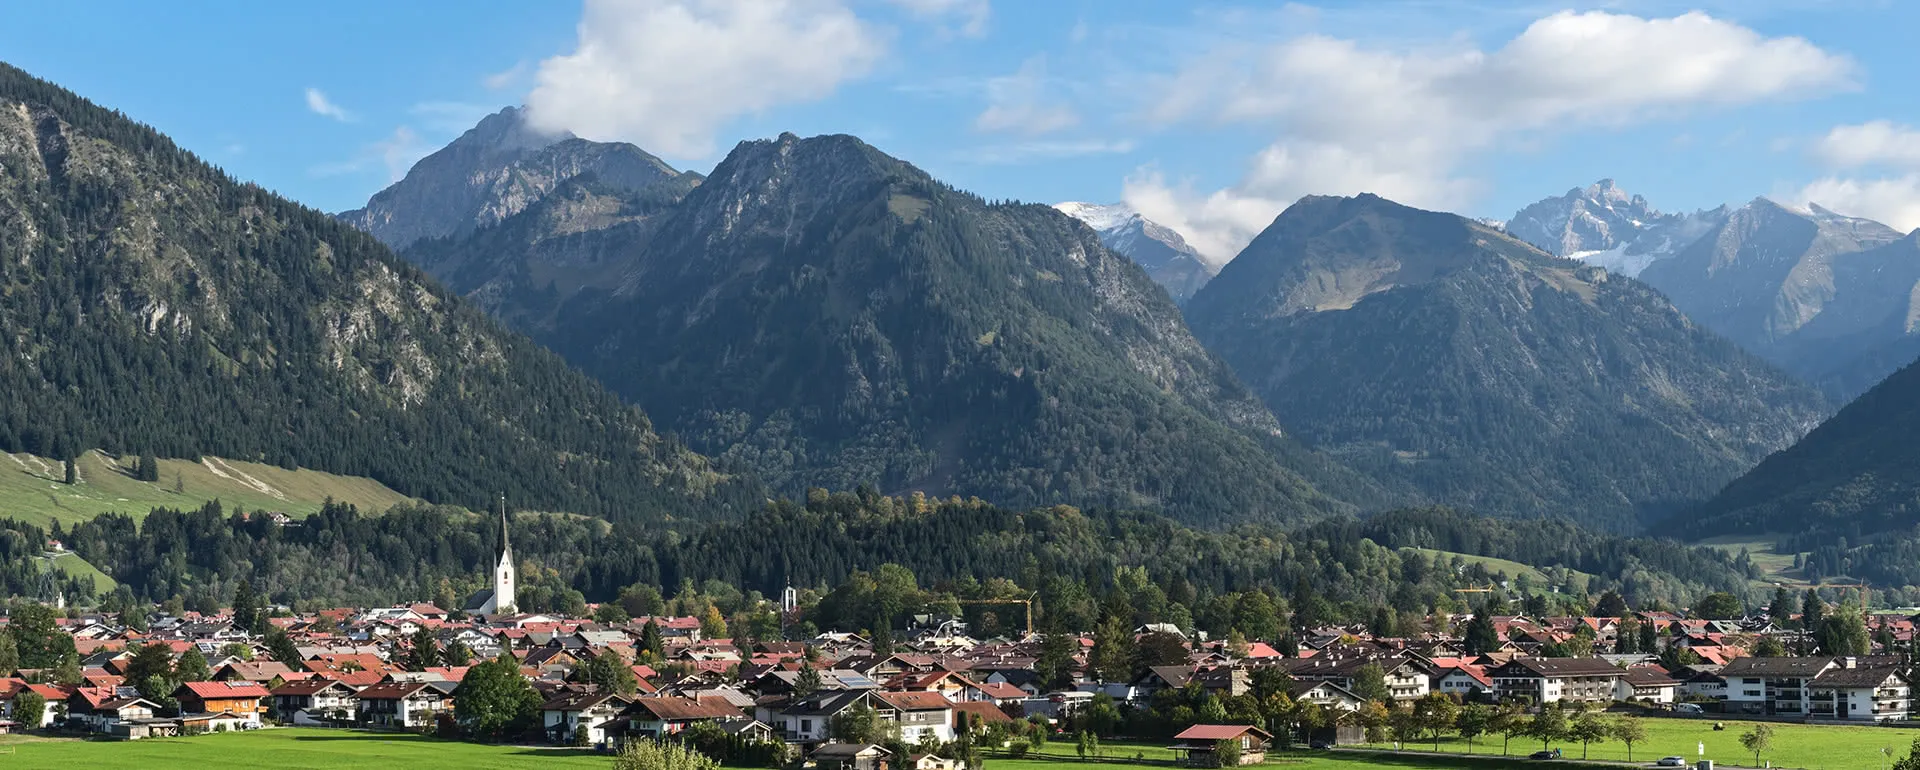 Oberstdorf - the destination with youth hostels